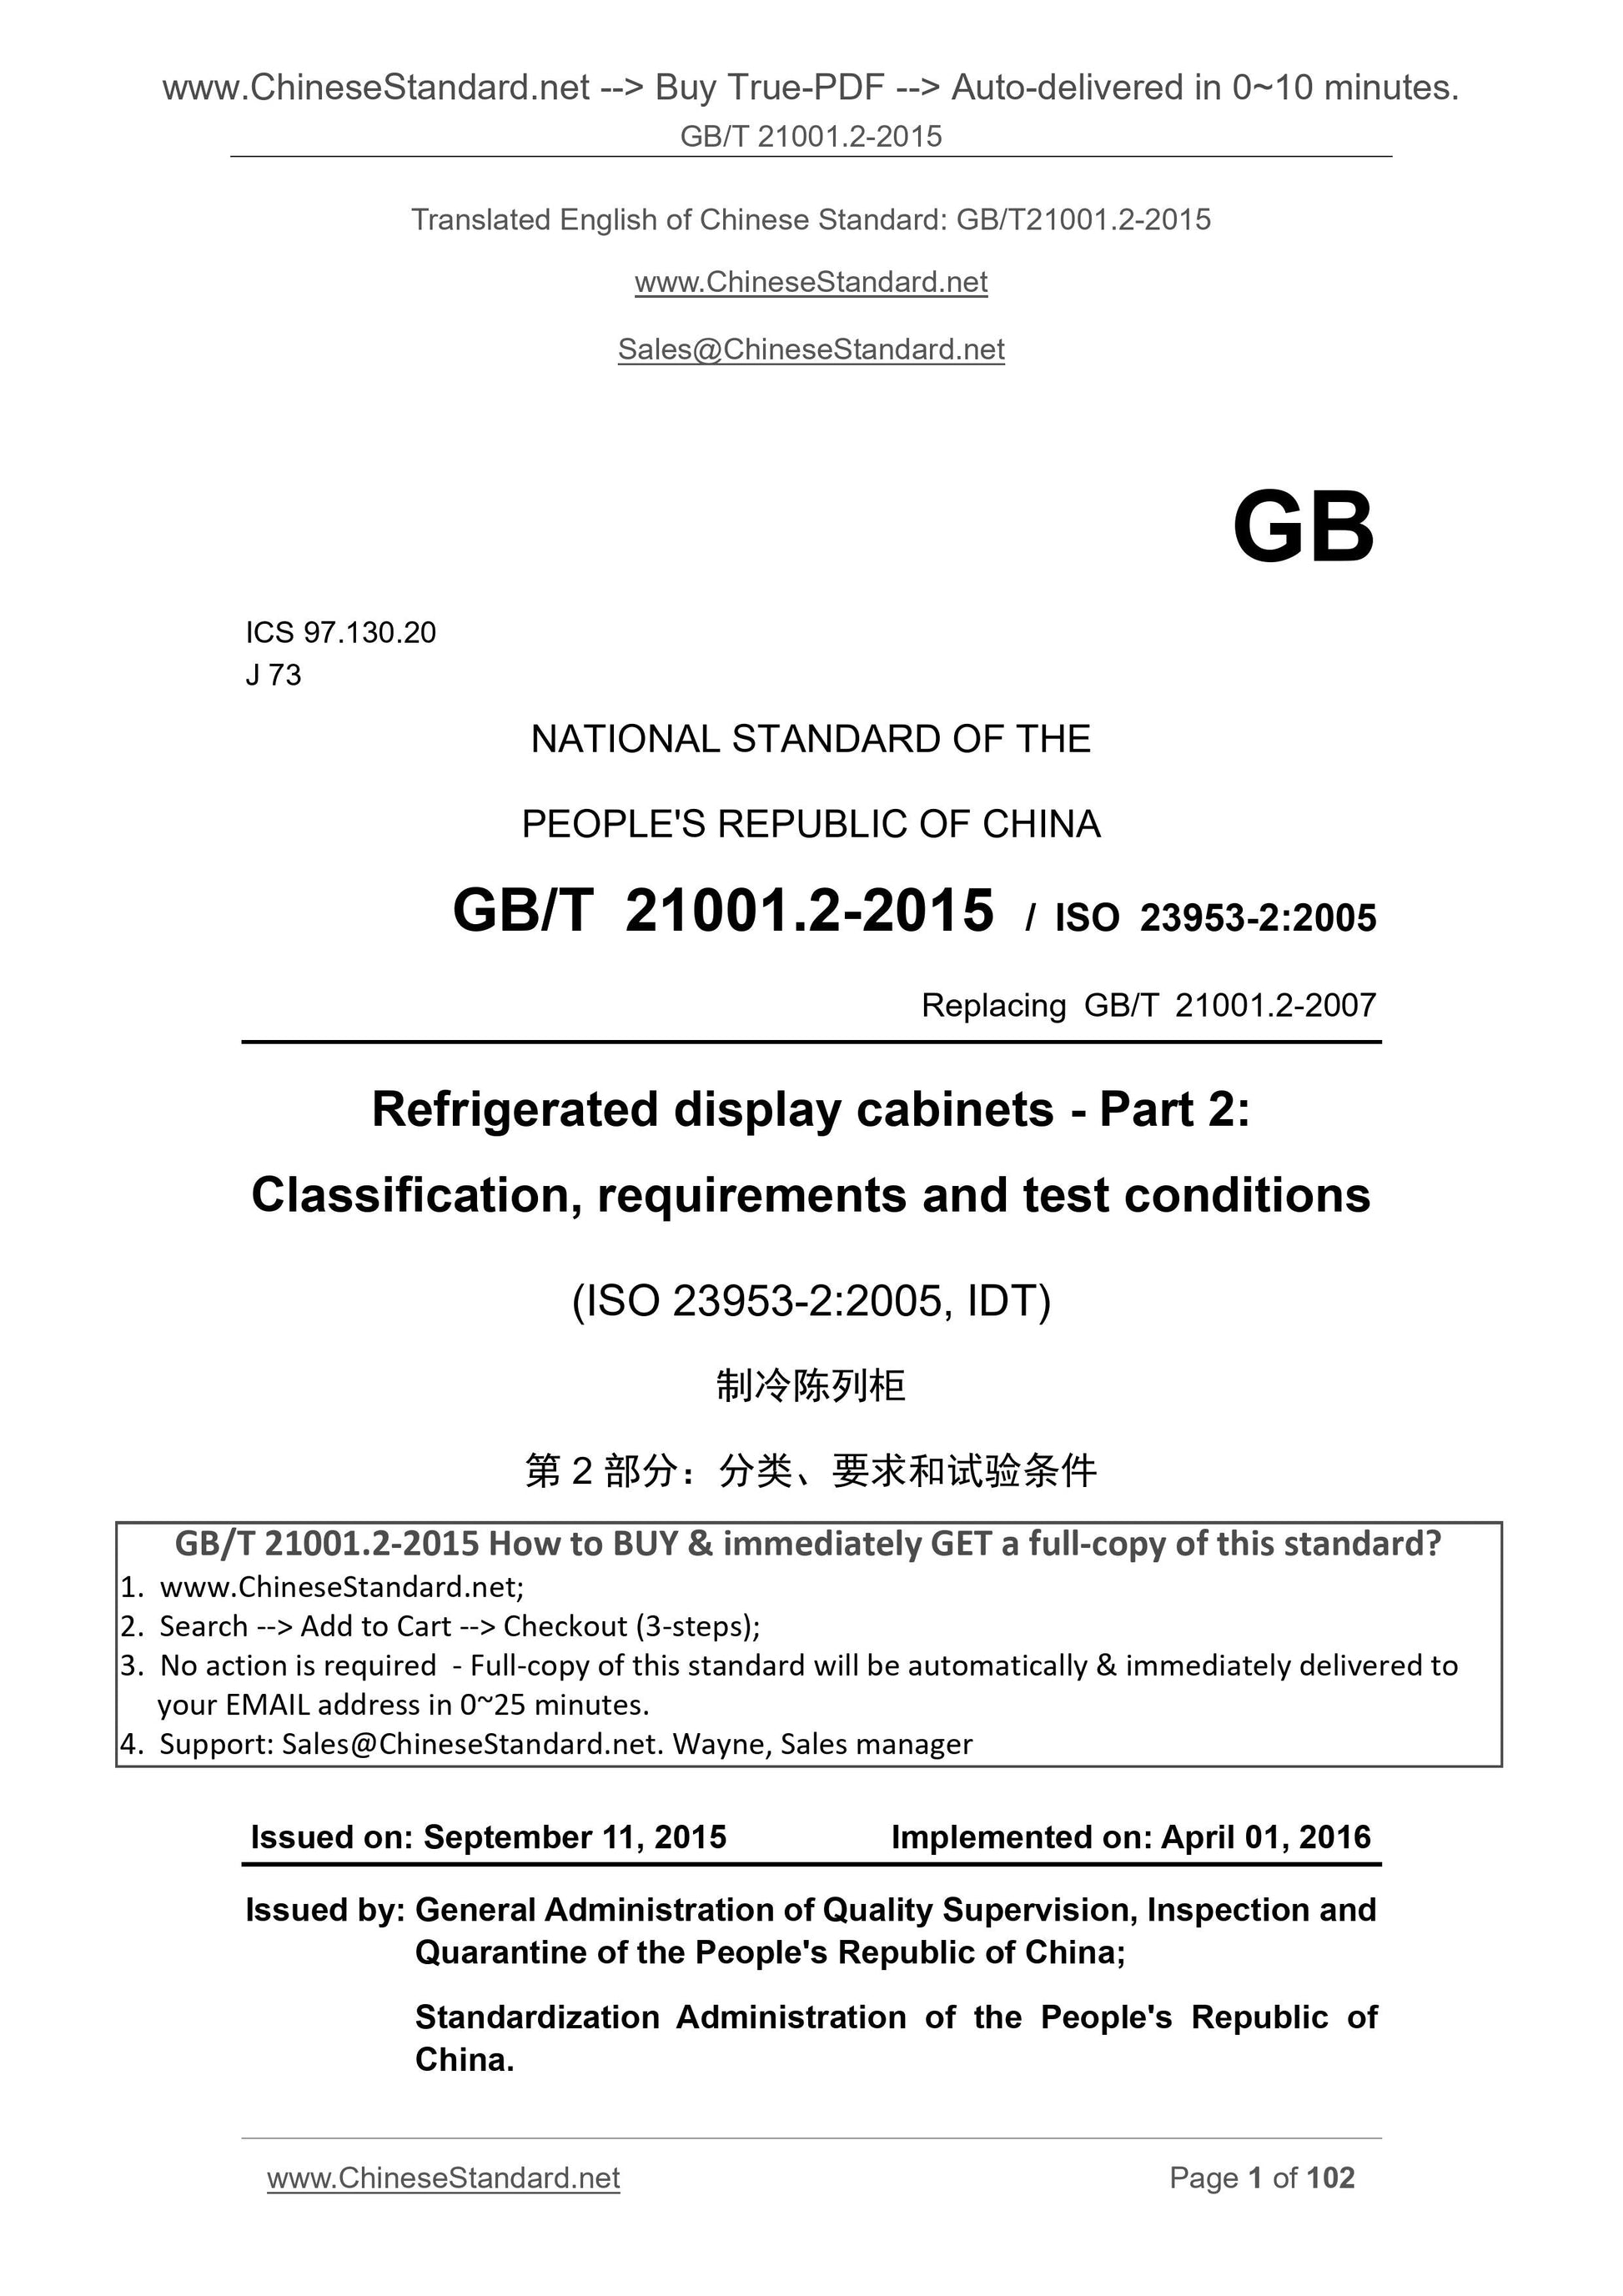 GB/T 21001.2-2015 Page 1